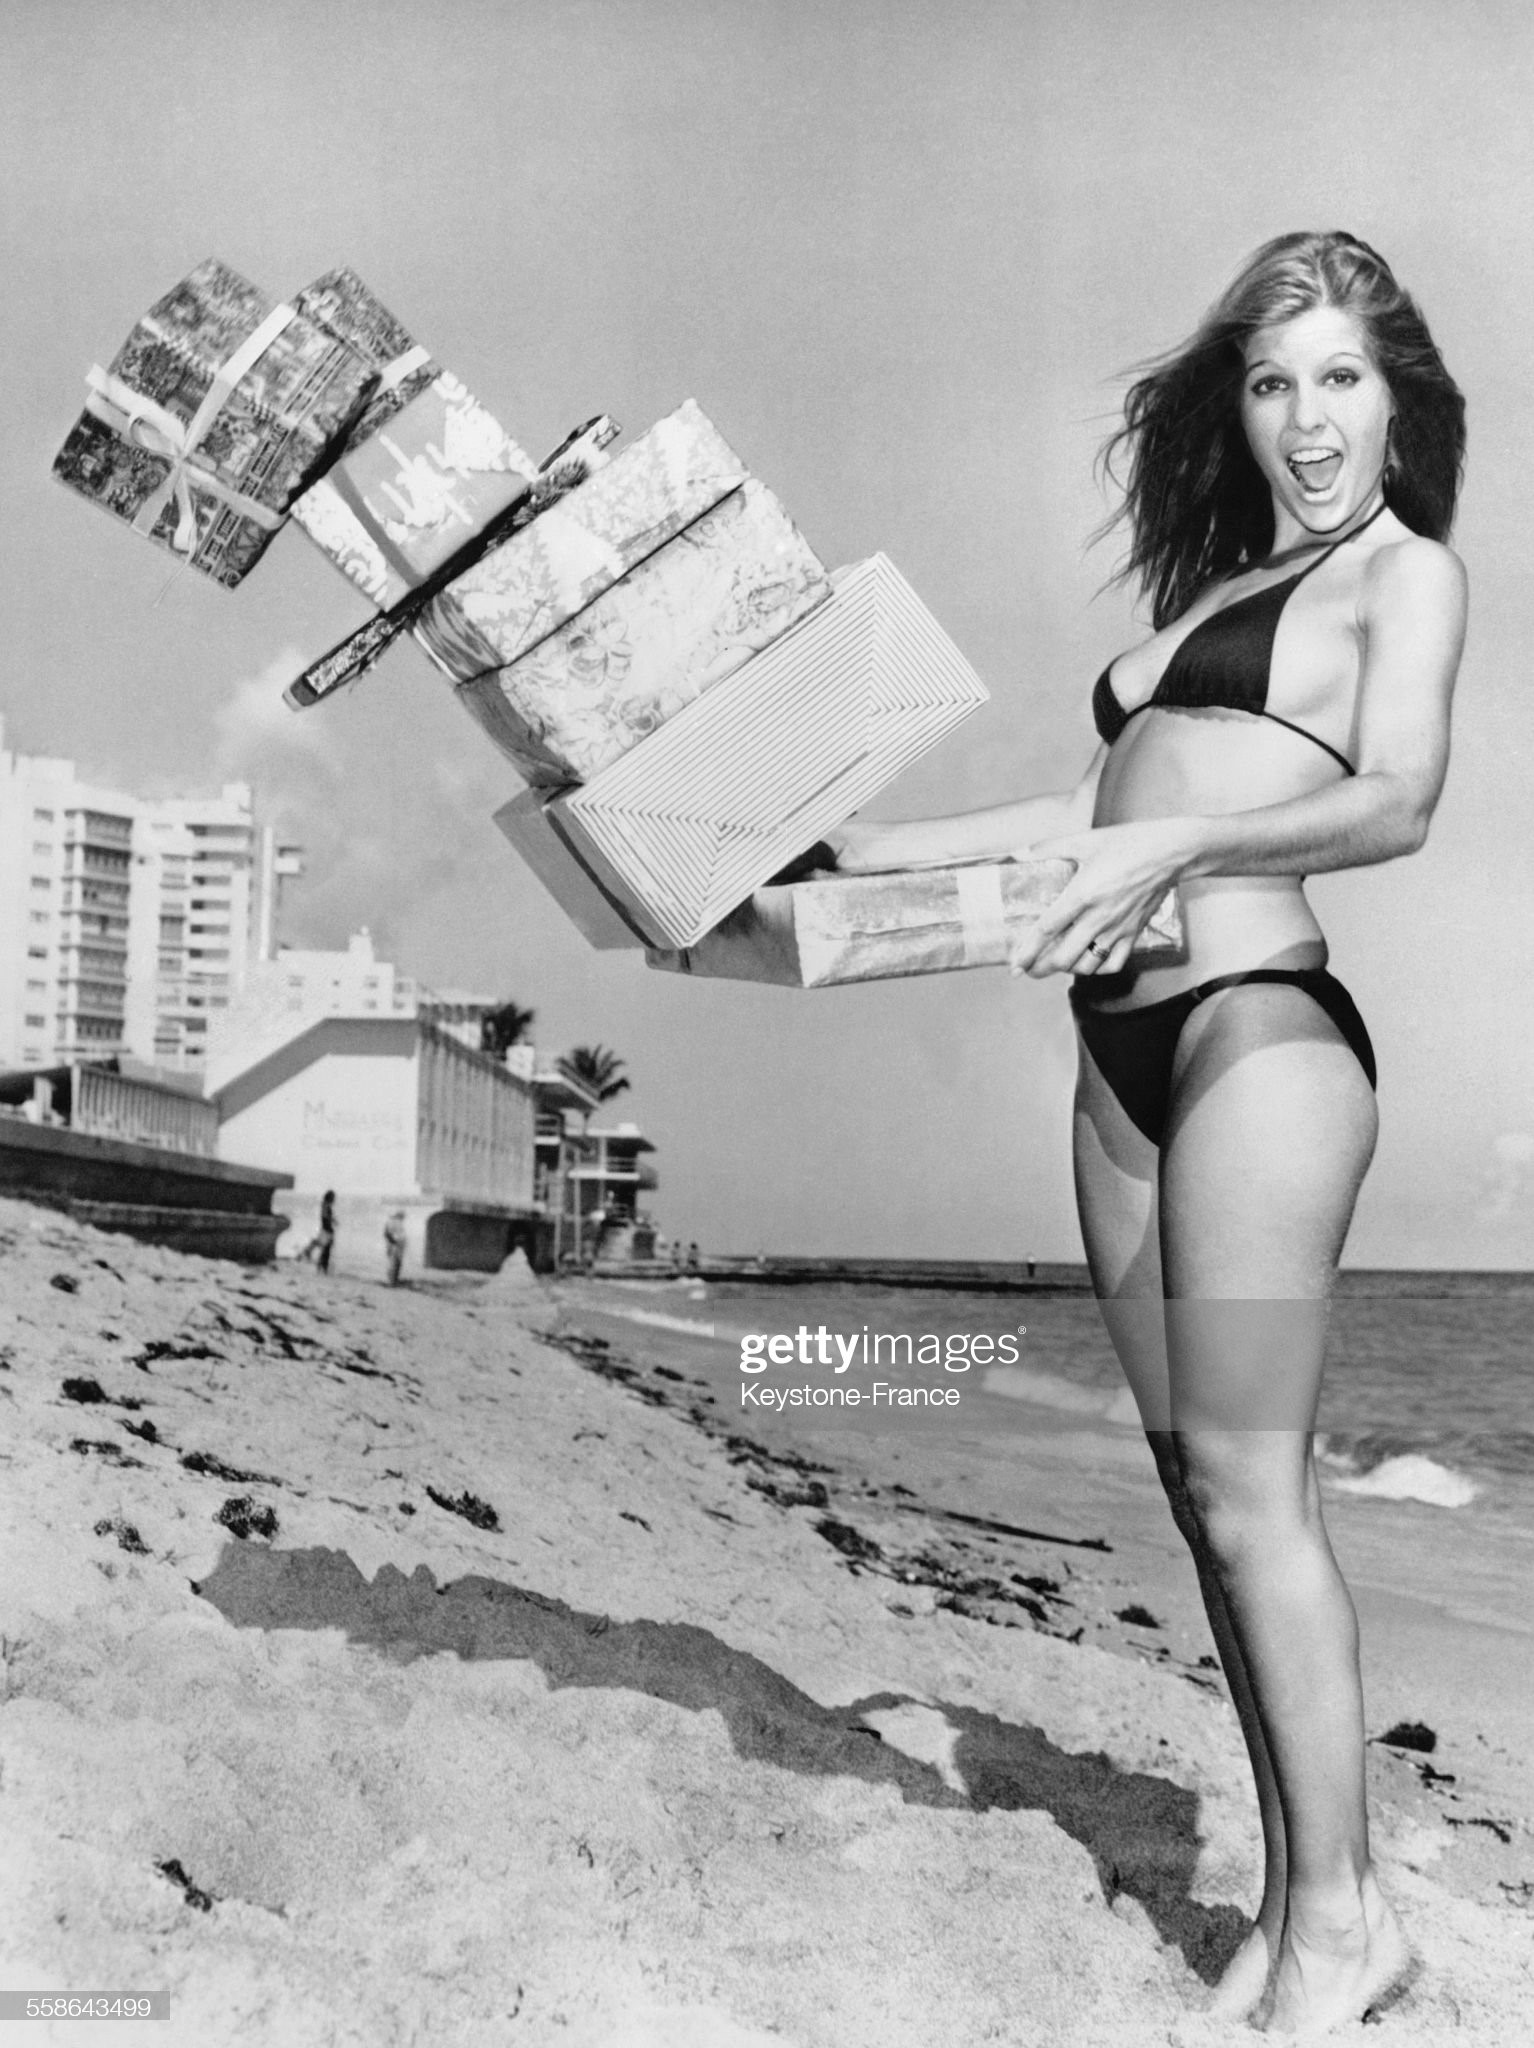 Young girl on a beach with gifts to announce the start of Christmas shopping in Miami, Florida. 